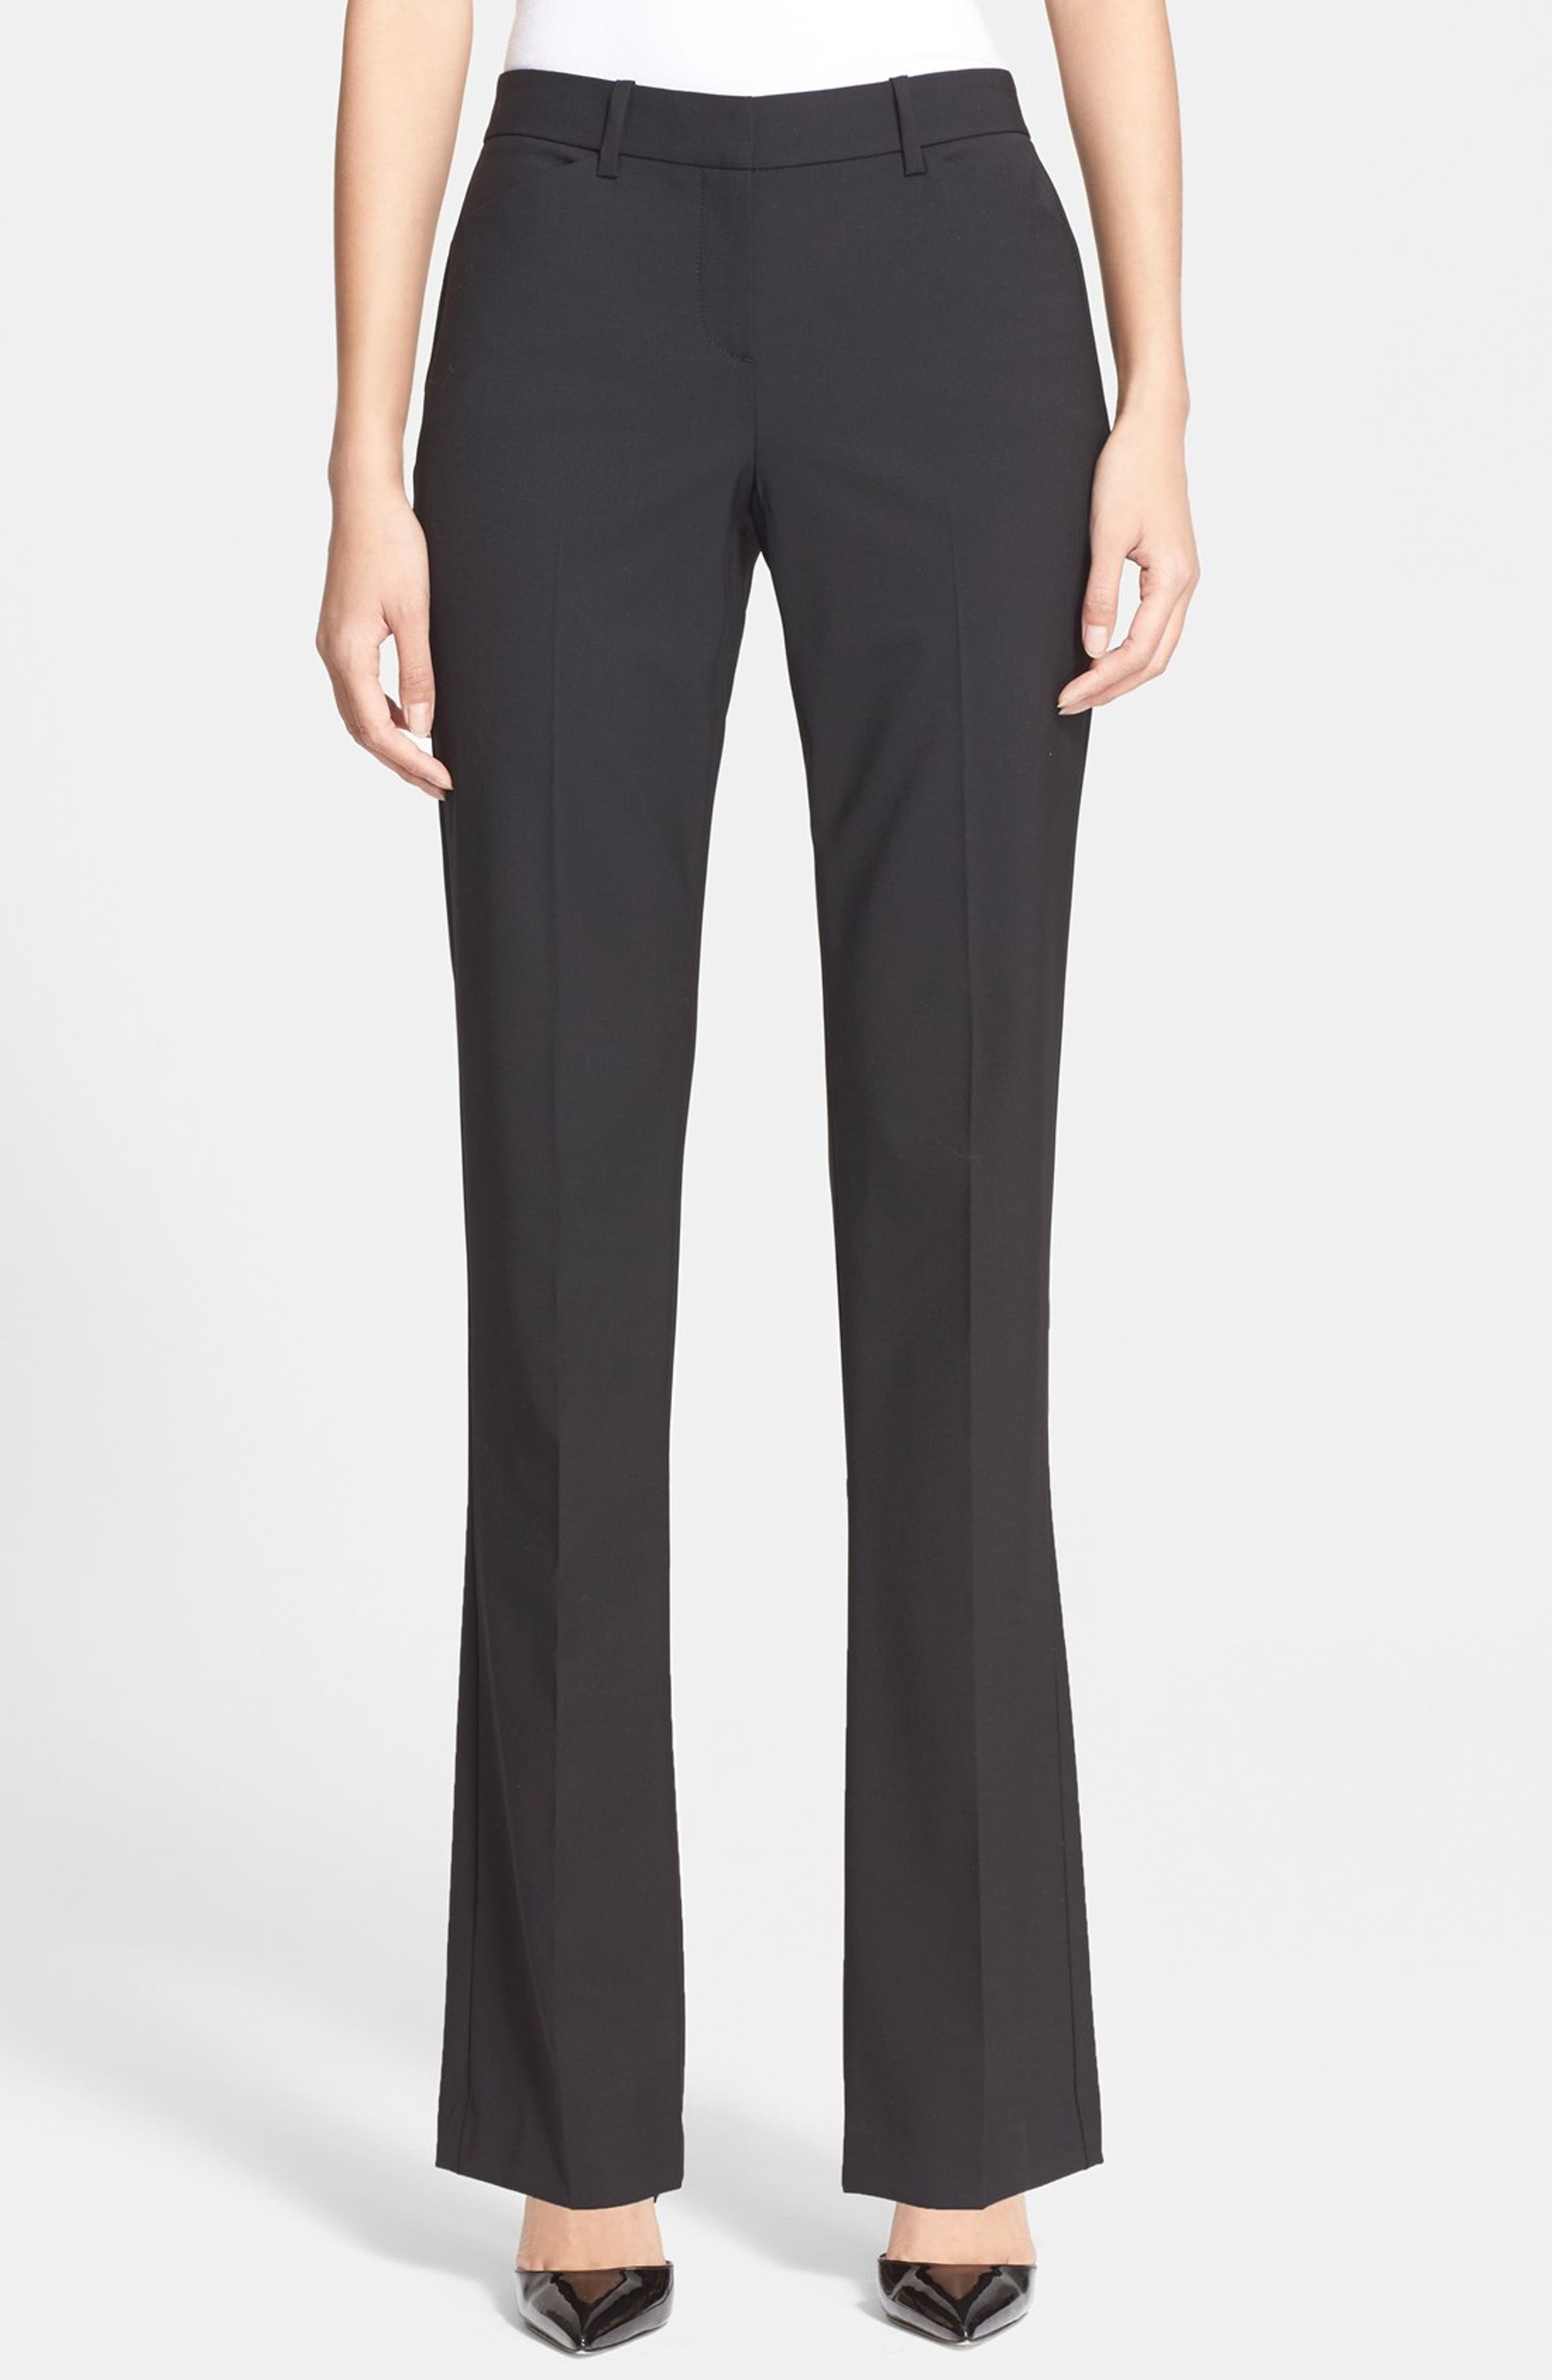 Theory Custom Max Stretch Wool Pants | Nordstrom